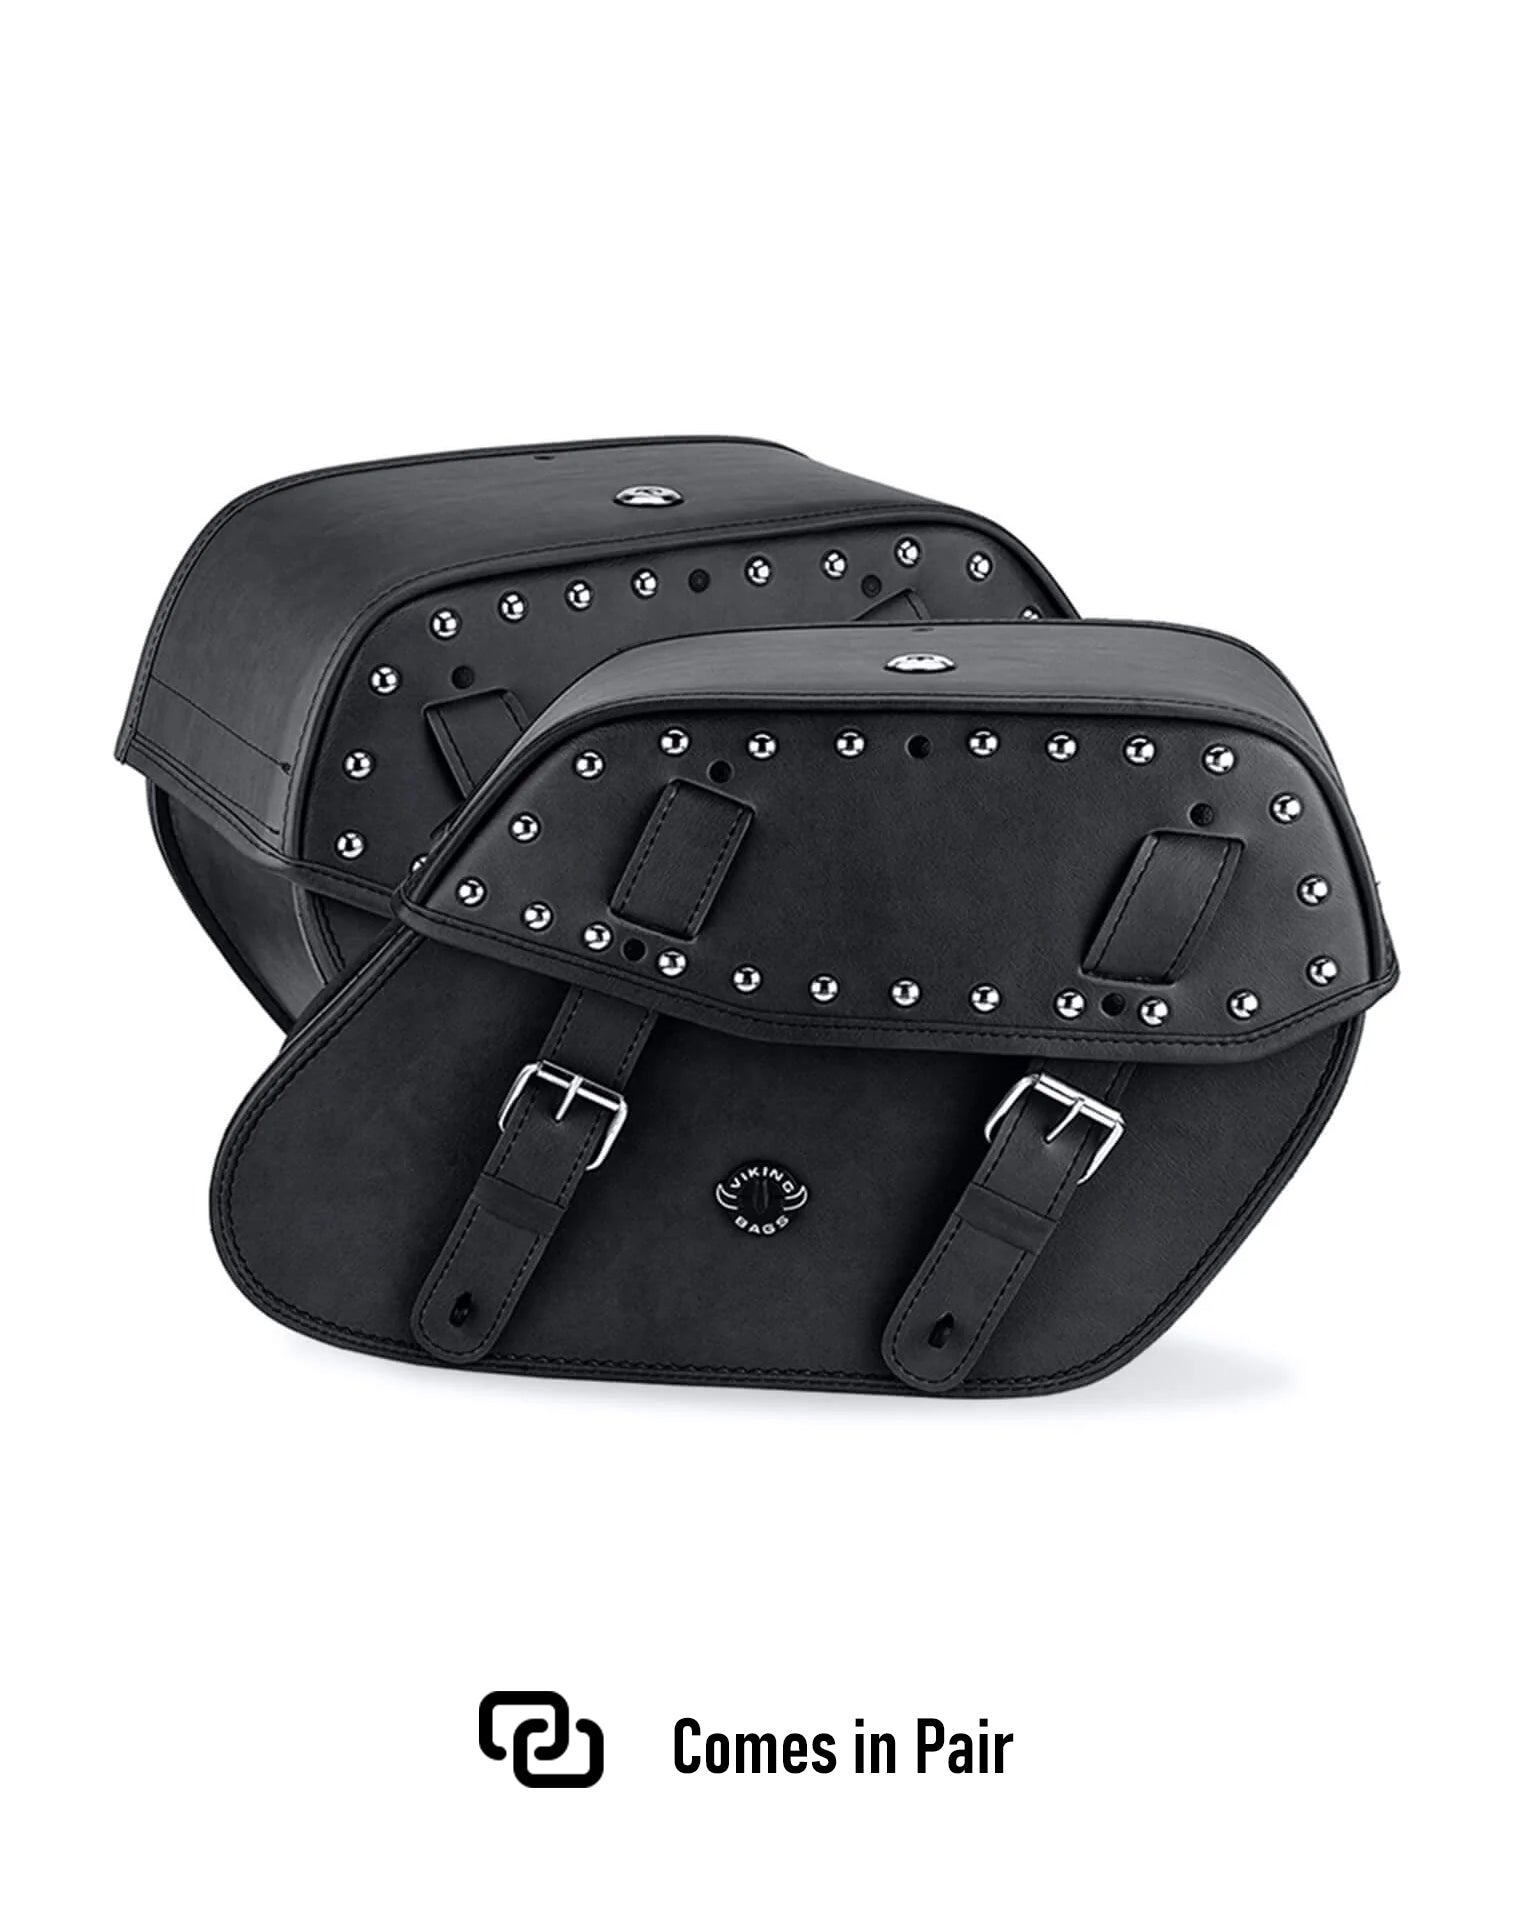 Viking Odin Large Hyosung Aquila Gv 250 Leather Studded Motorcycle Saddlebags Weather Resistant Bags Comes in Pair